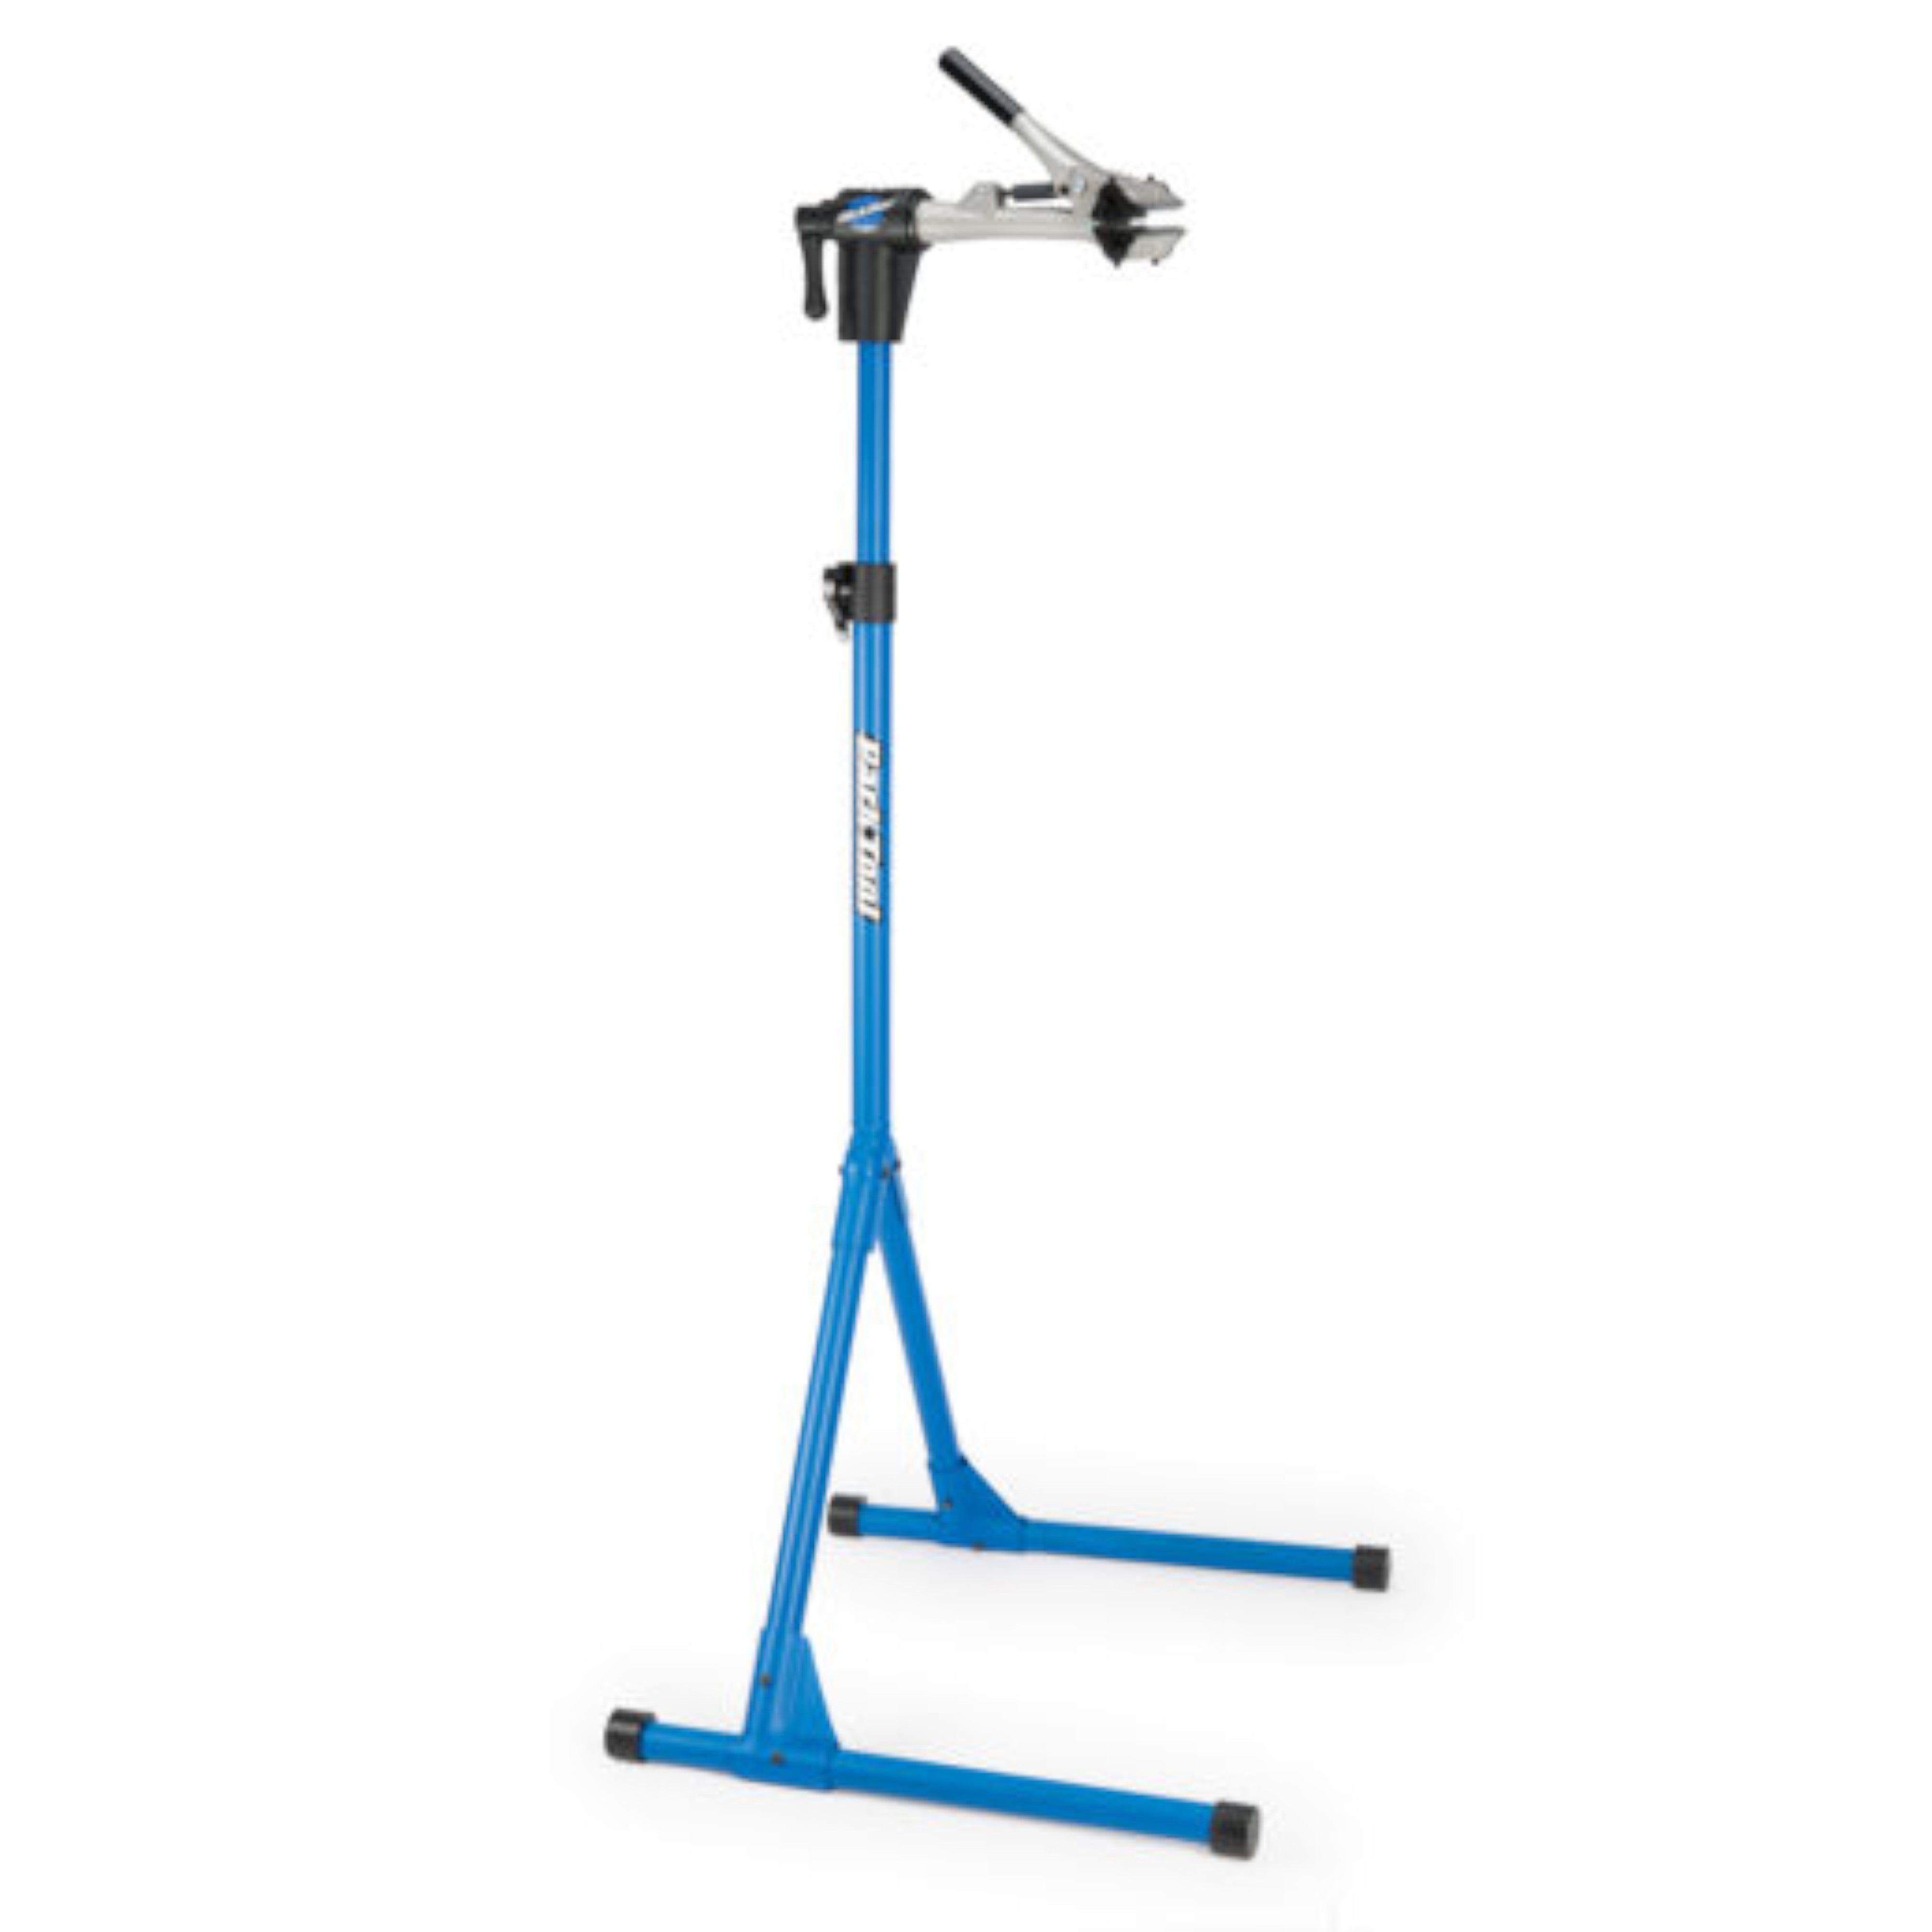 Park Tool PCS-4-1 Repair Stand with 100-5C Linkage Clamp - The Bikesmiths